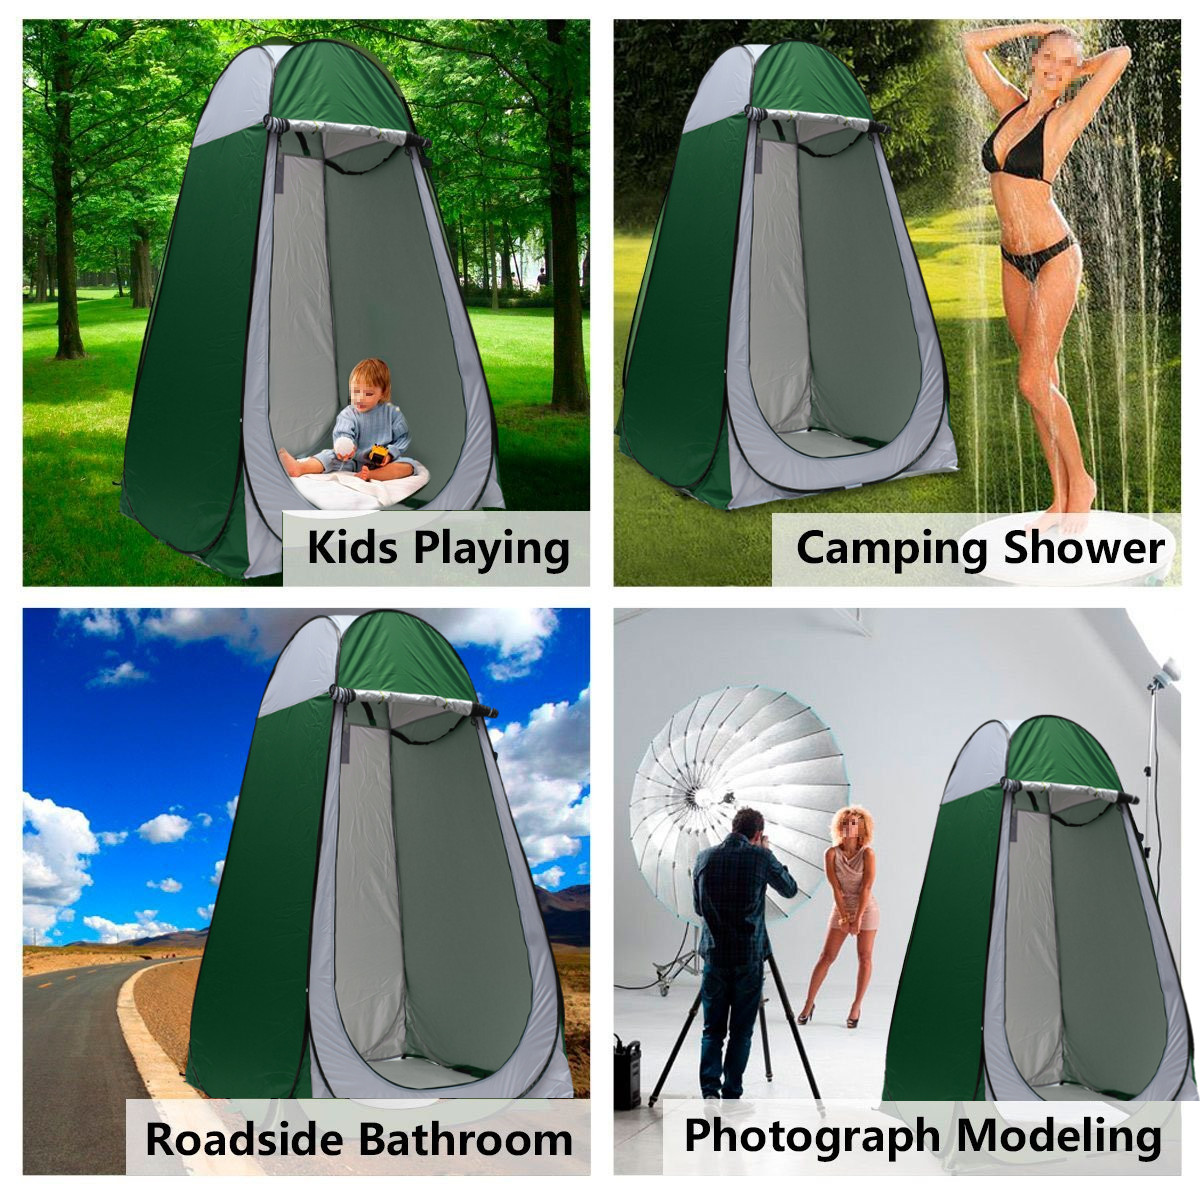 12x12x19m-Portable-Pop-up-Tent-Camping-Travel-Toilet-Shower-Room-Outdoor-Shelter-1226005